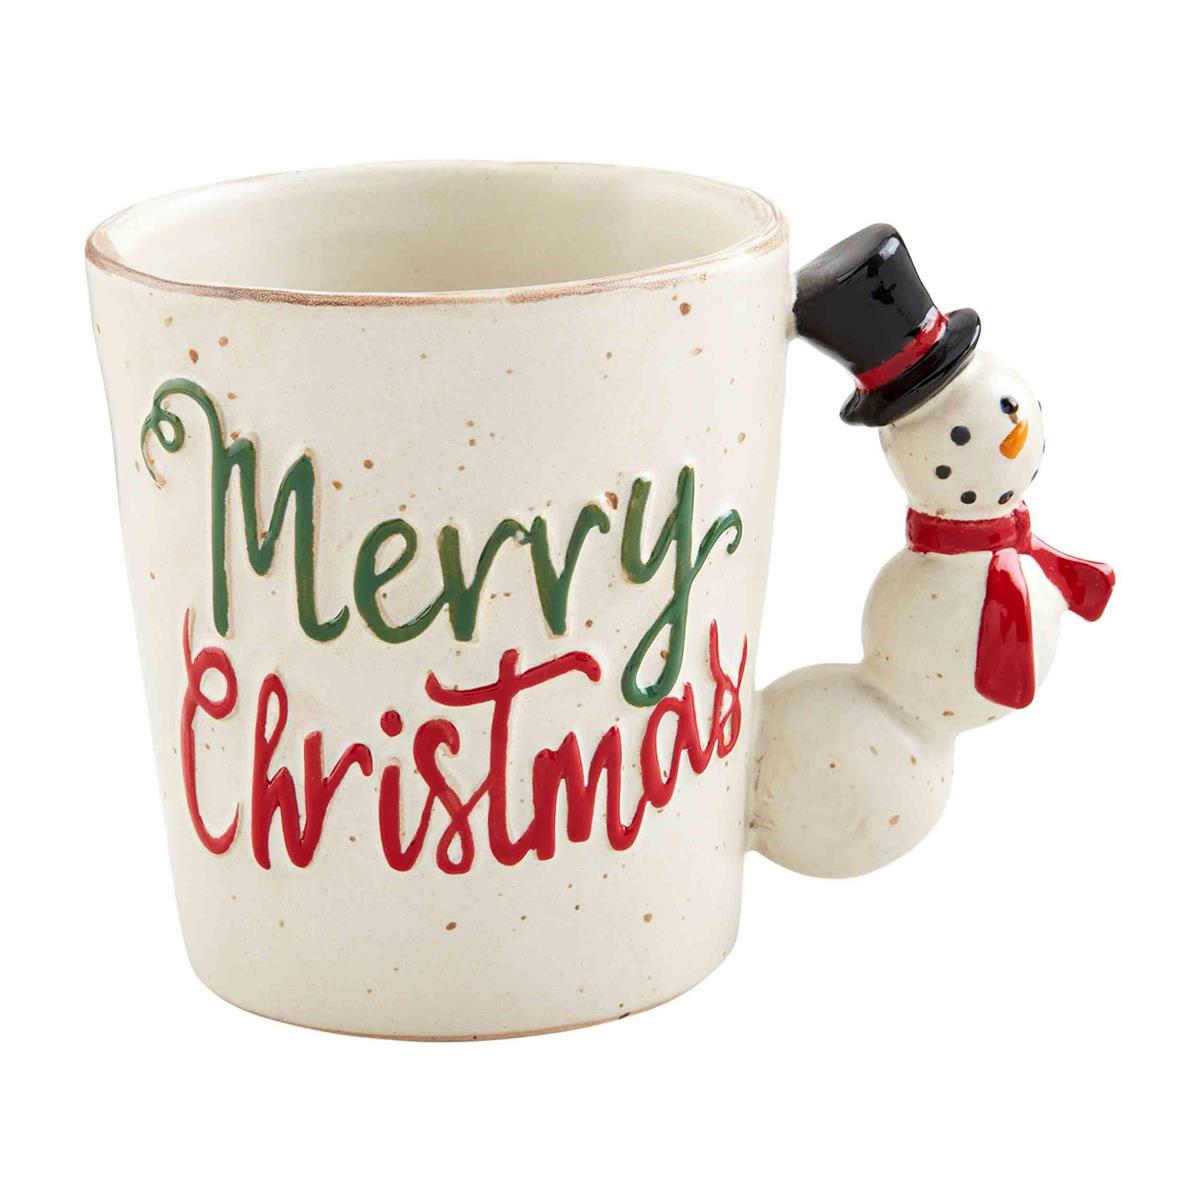 A Merry Christmas coffee mug, with a snowman wearing a top hat, and red scarf as the handle. Designed by Mud Pie.